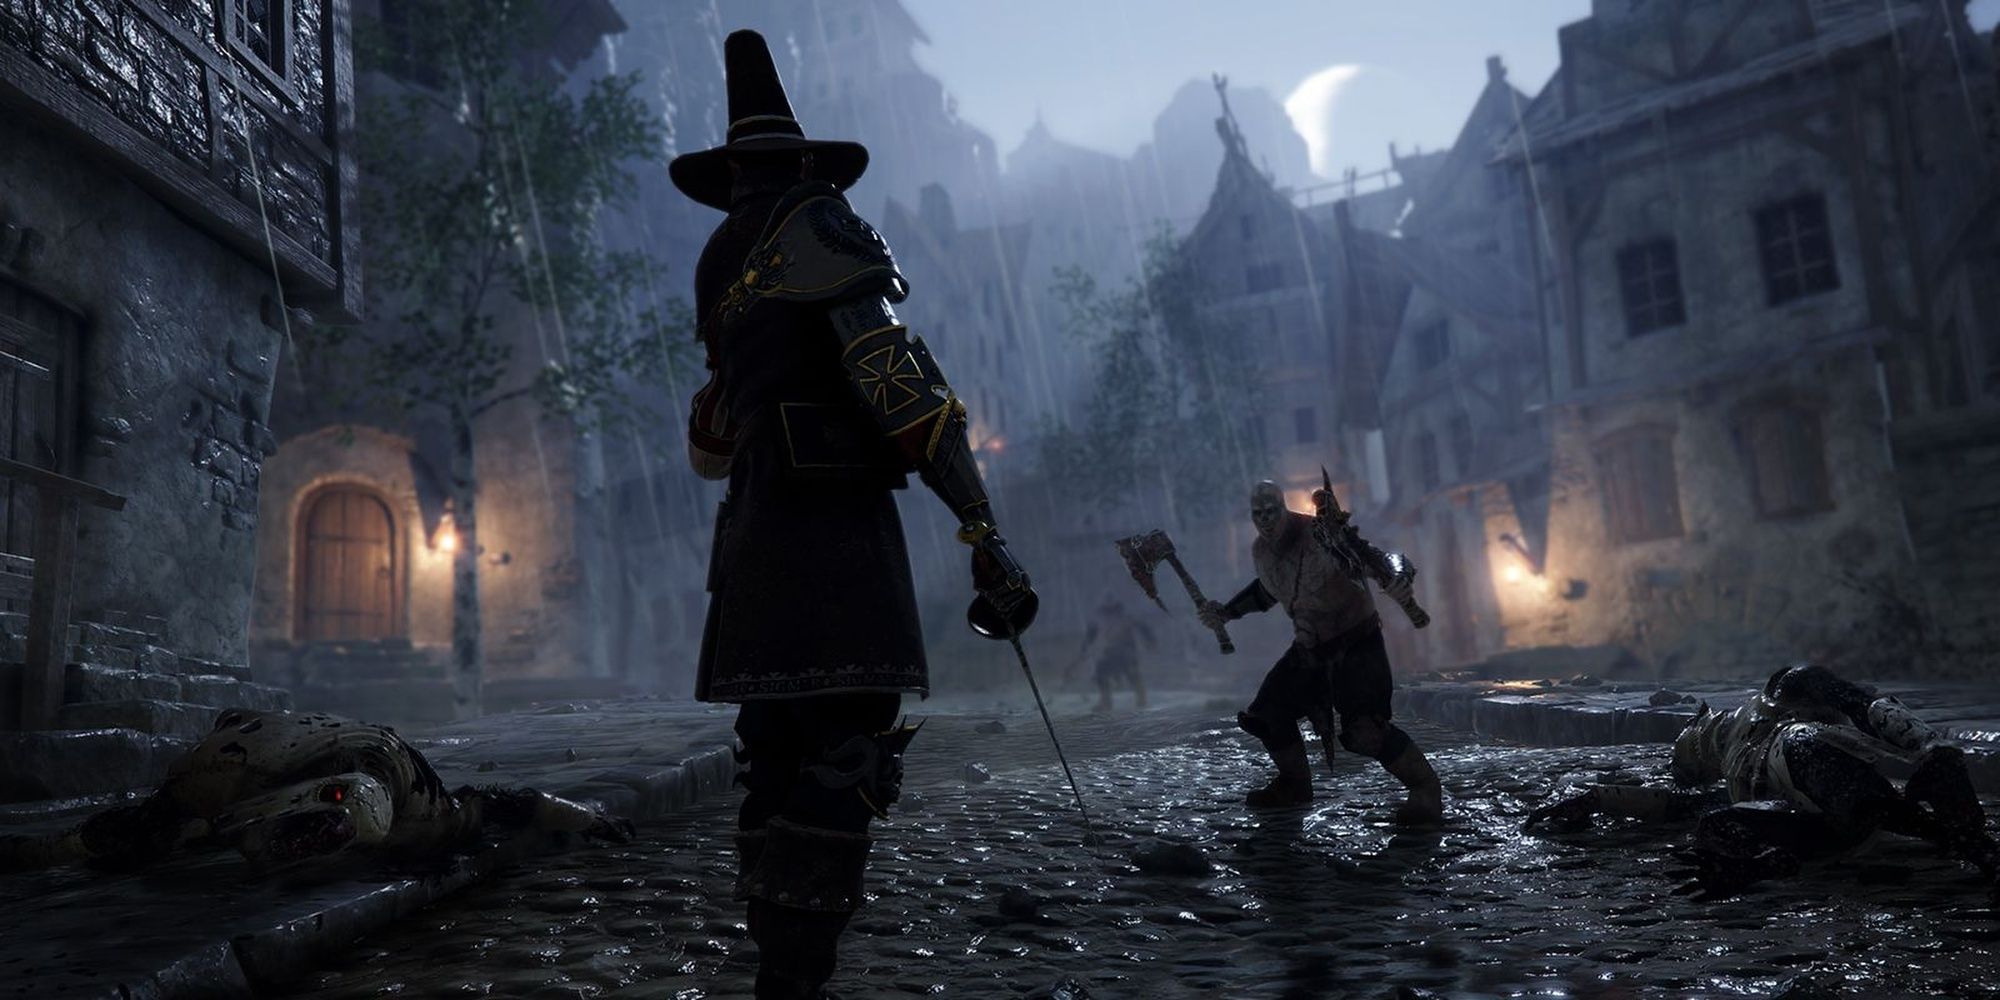 Vermintide 2: The Witch Hunter Captain Facing Down A Chaos Beserker